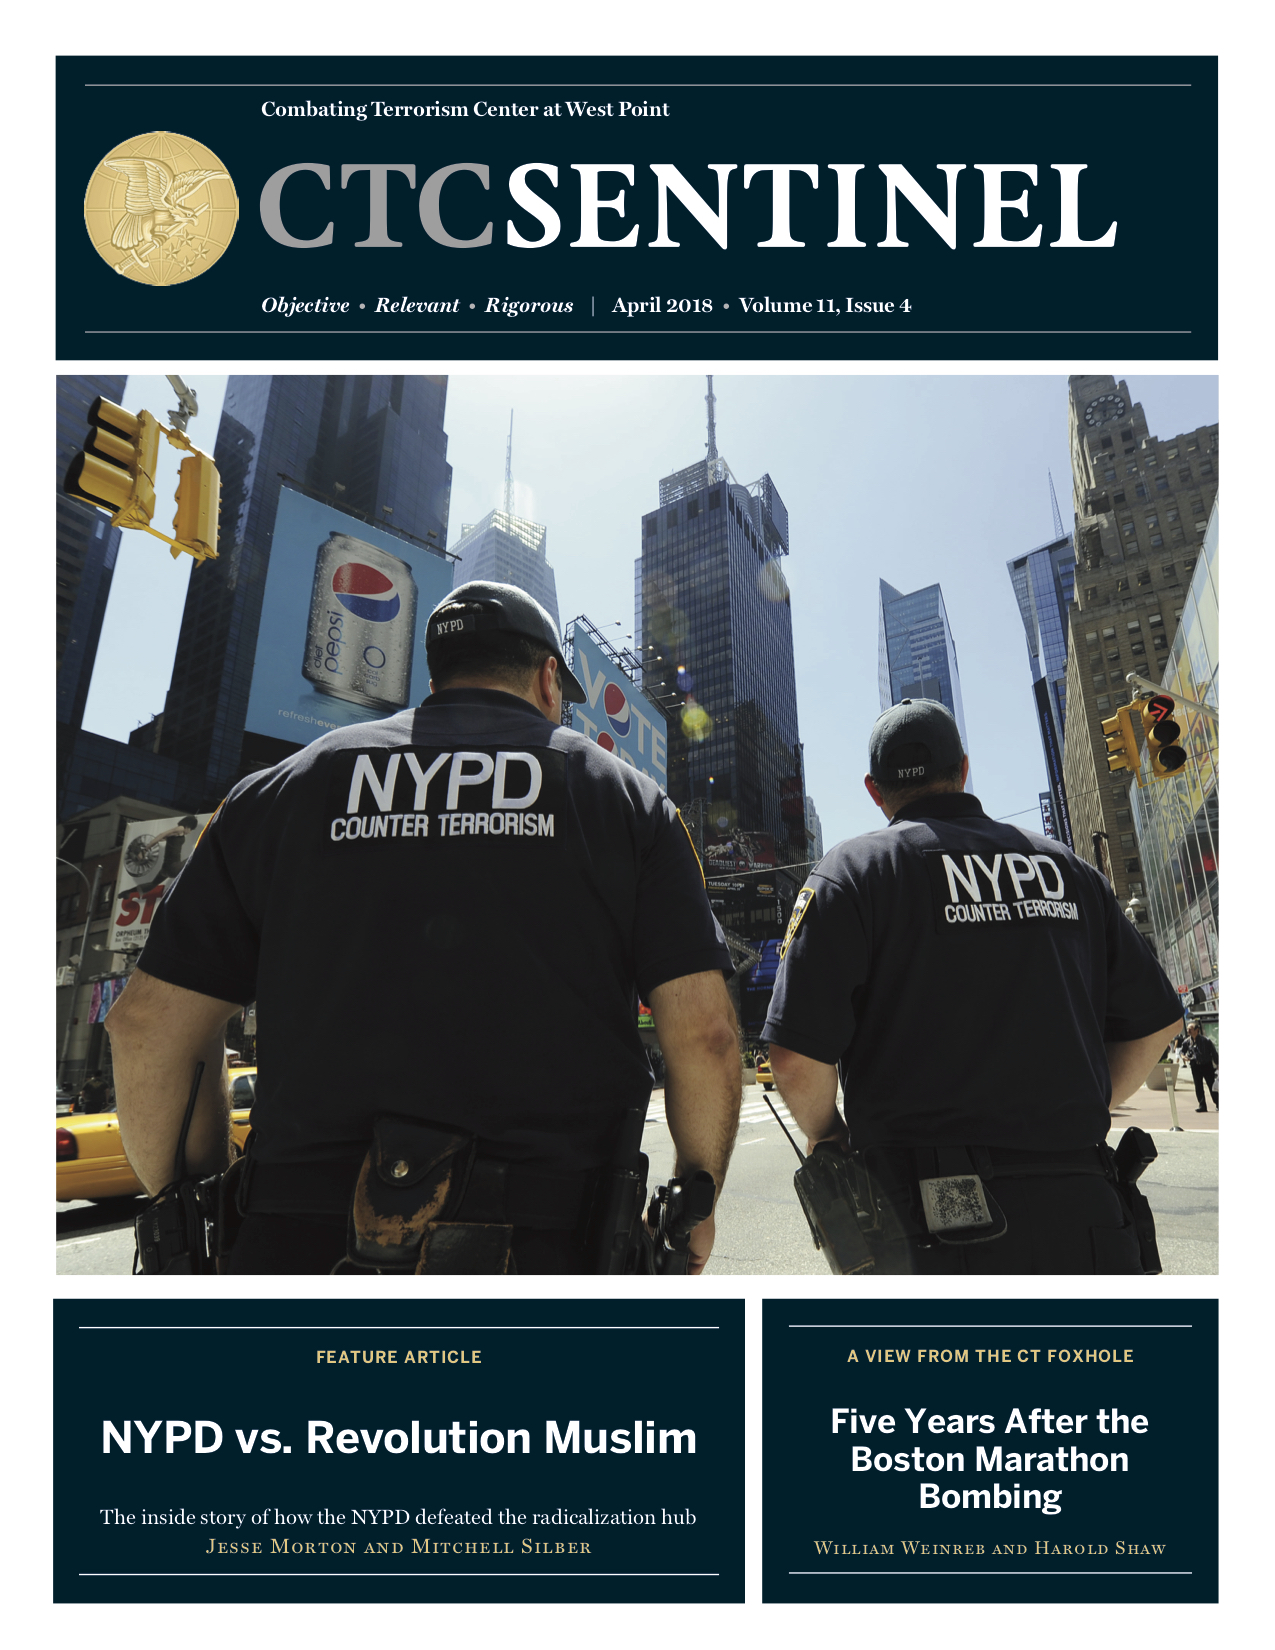 NYPD vs. Revolution Muslim: The Inside Story of the Defeat of a Local  Radicalization Hub – Combating Terrorism Center at West Point